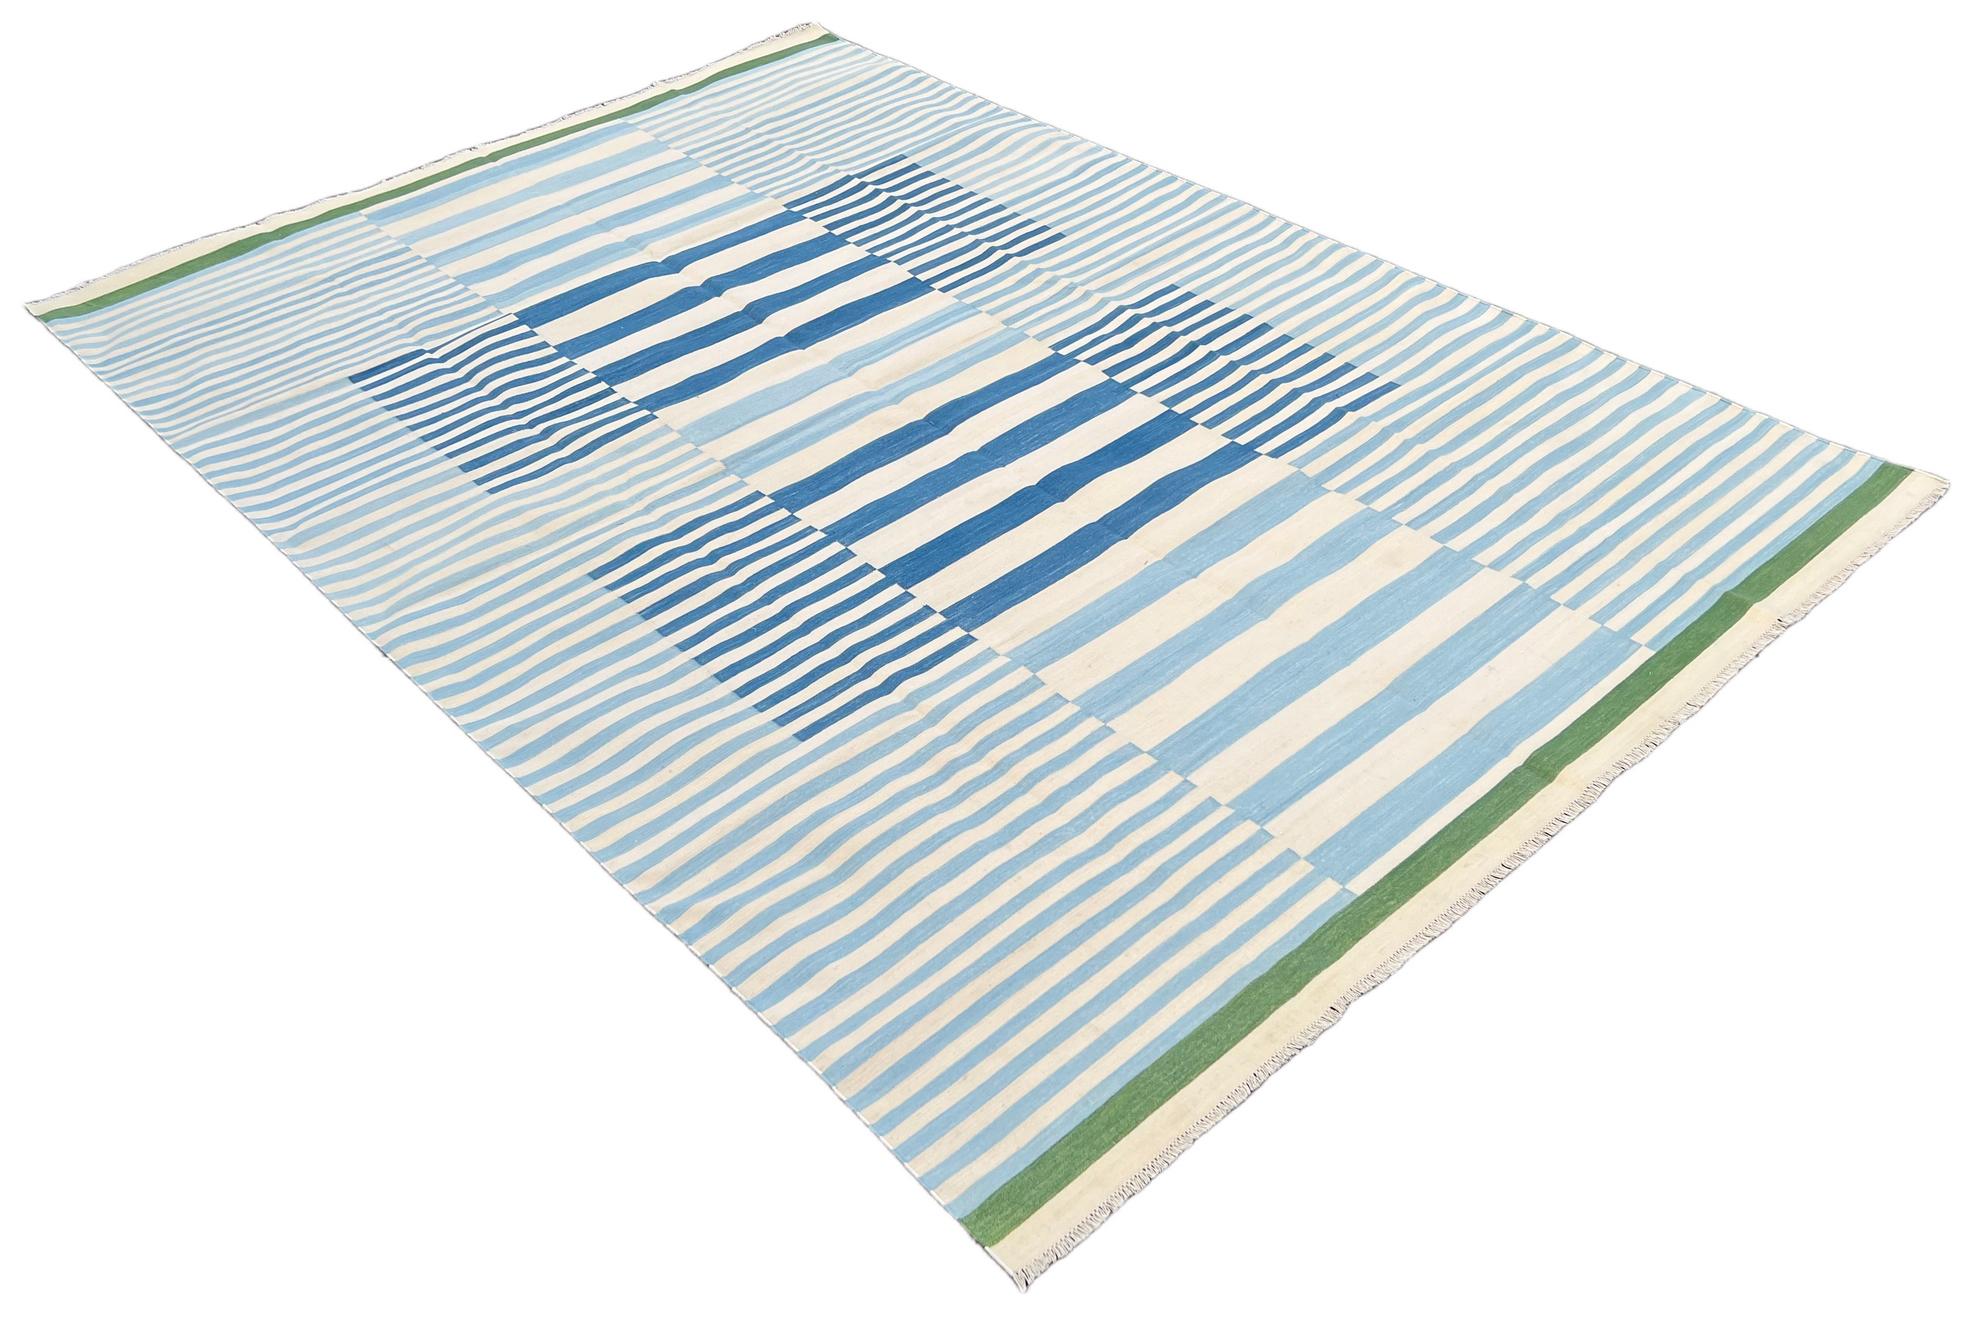 Cotton Vegetable Dyed Blue, White And Green Striped Indian Dhurrie Rug-8'x10' 
These special flat-weave dhurries are hand-woven with 15 ply 100% cotton yarn. Due to the special manufacturing techniques used to create our rugs, the size and color of